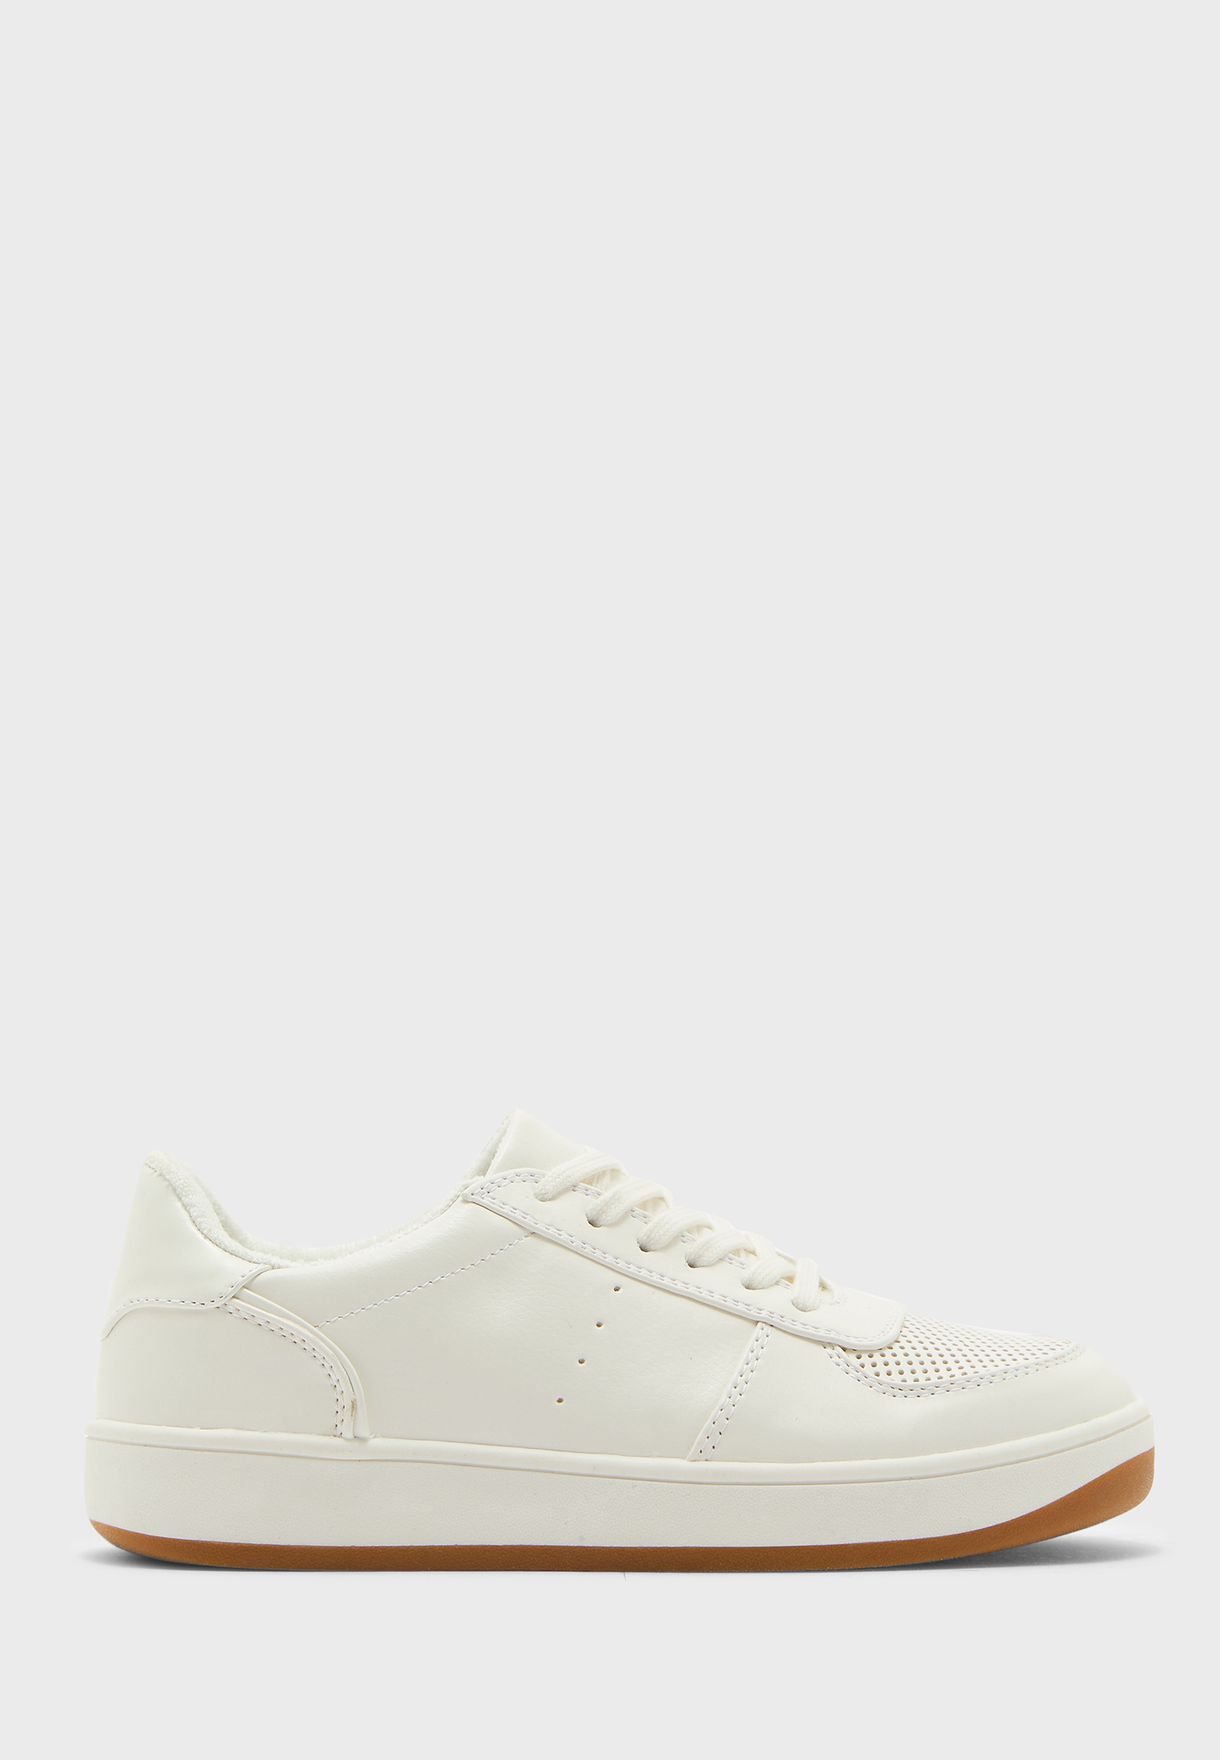 american eagle white slip on shoes